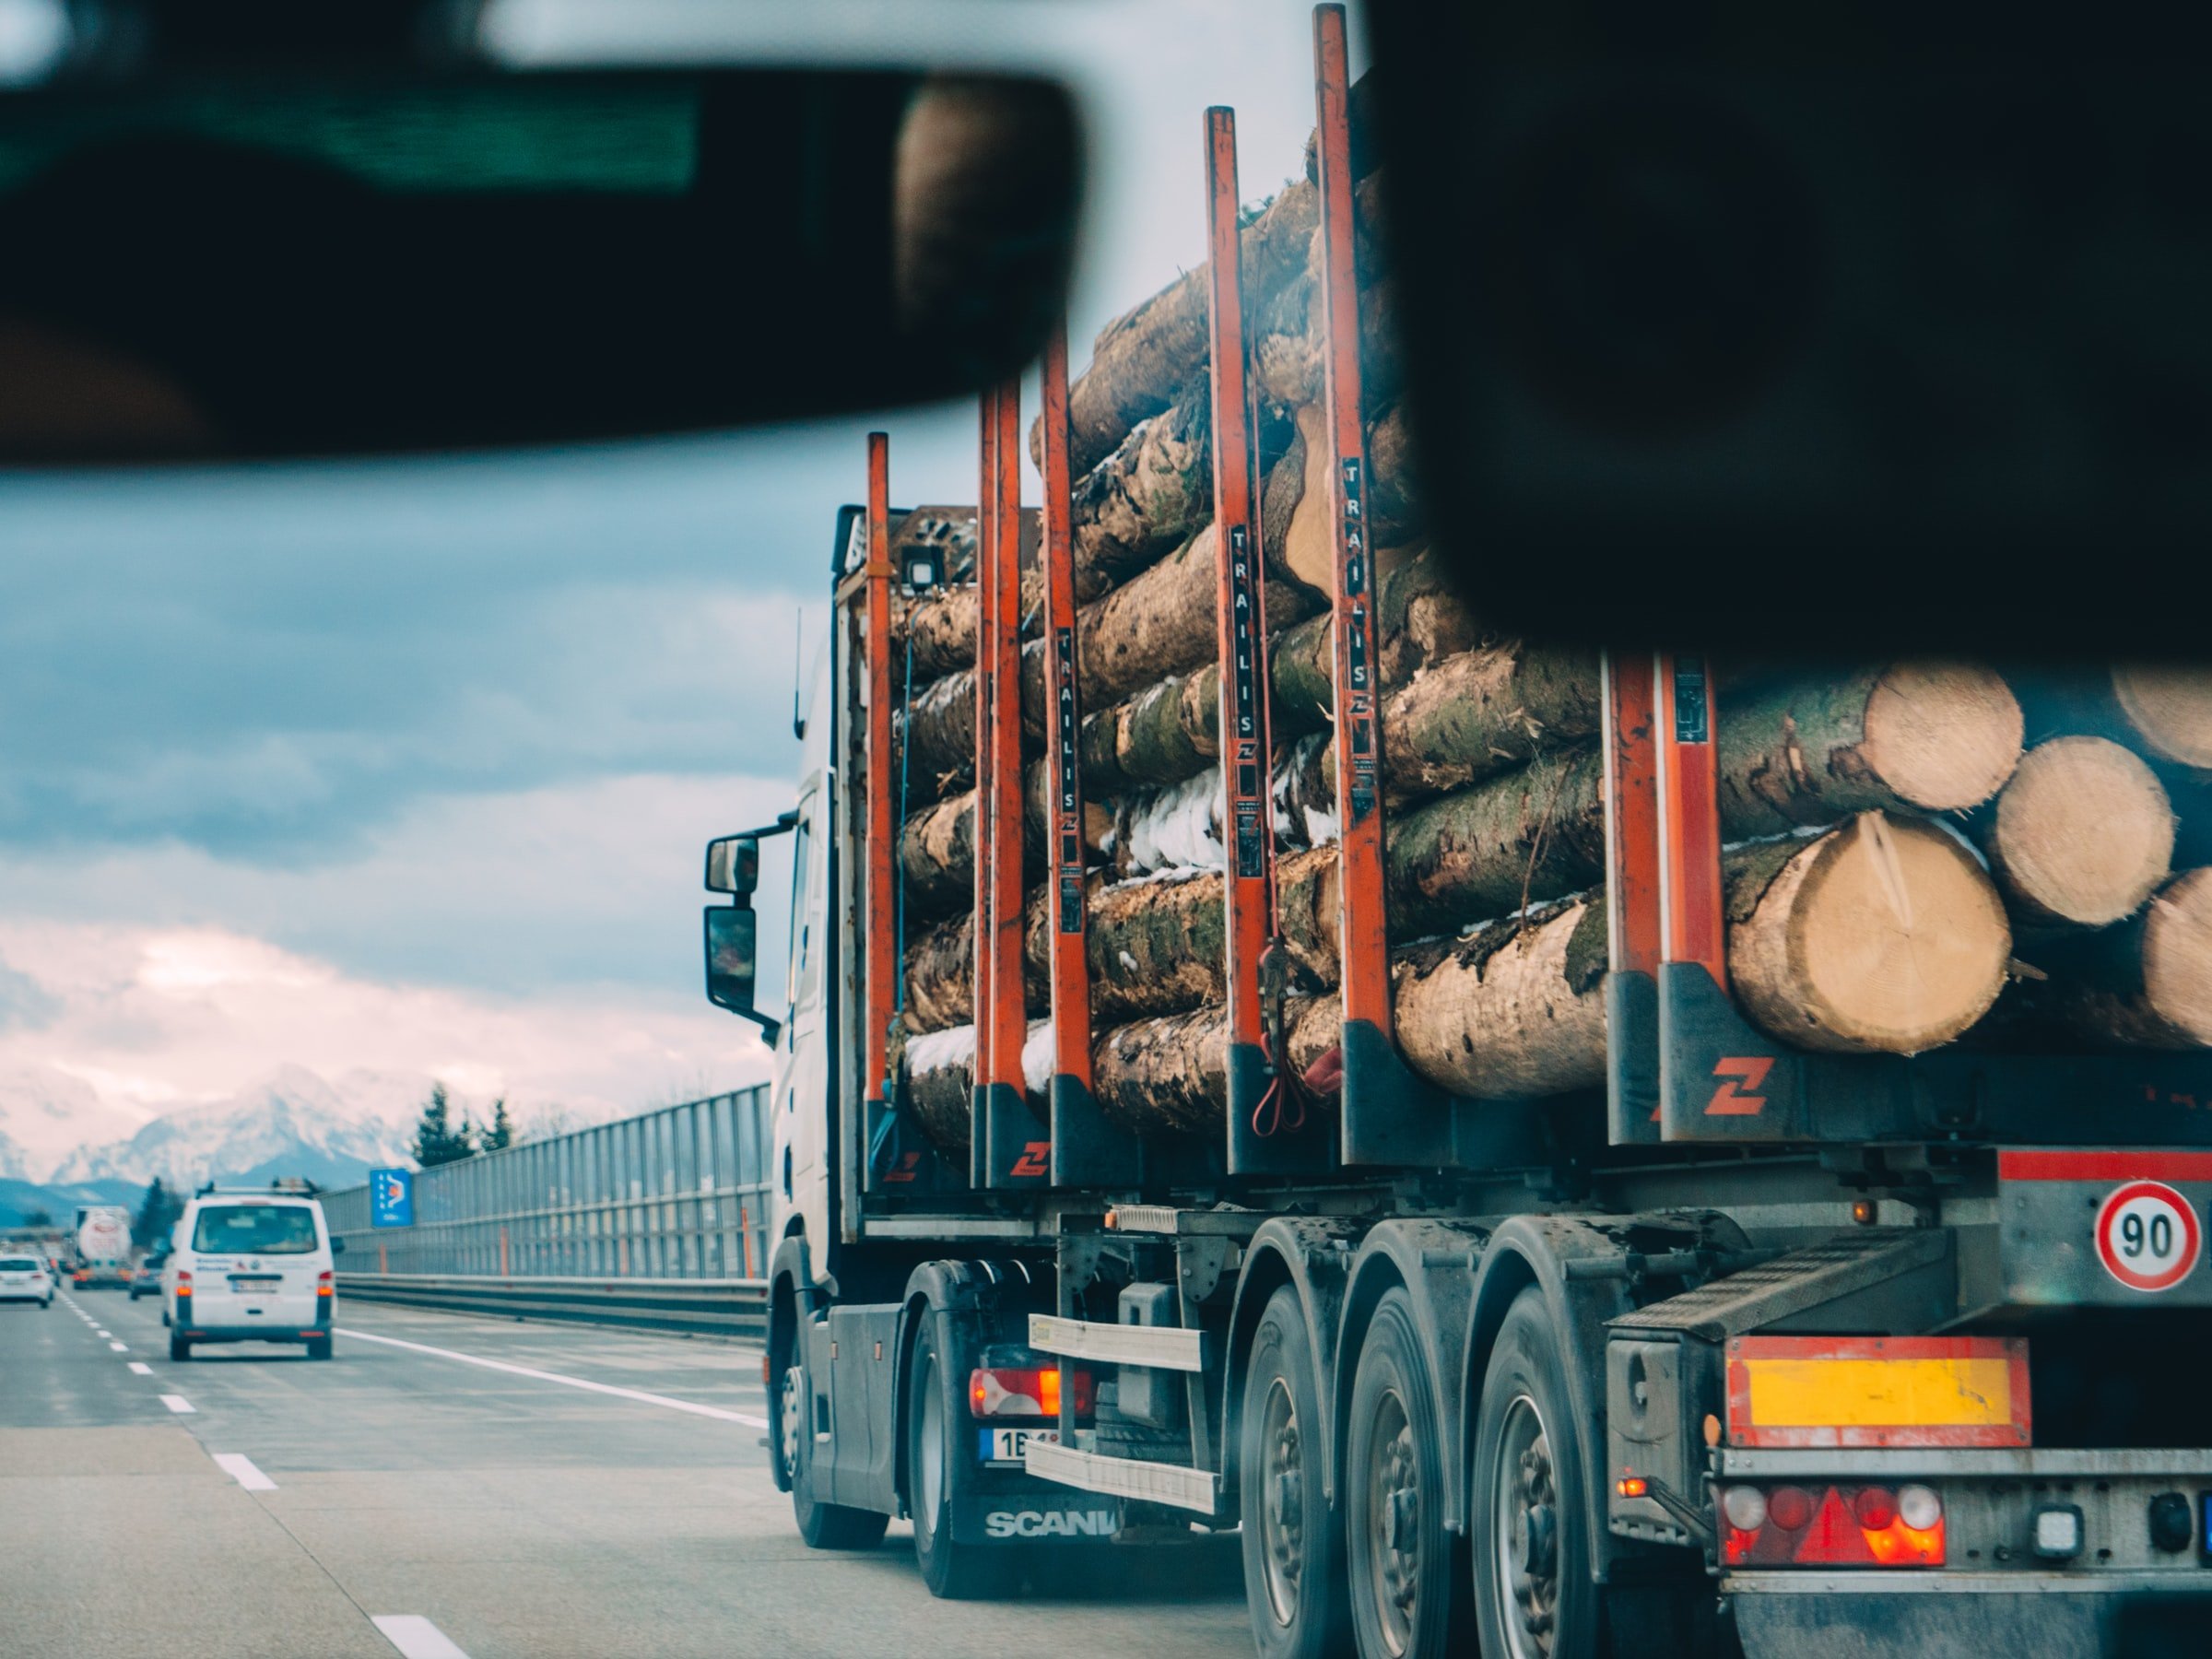 A lorry on the road. | Source: Unsplash